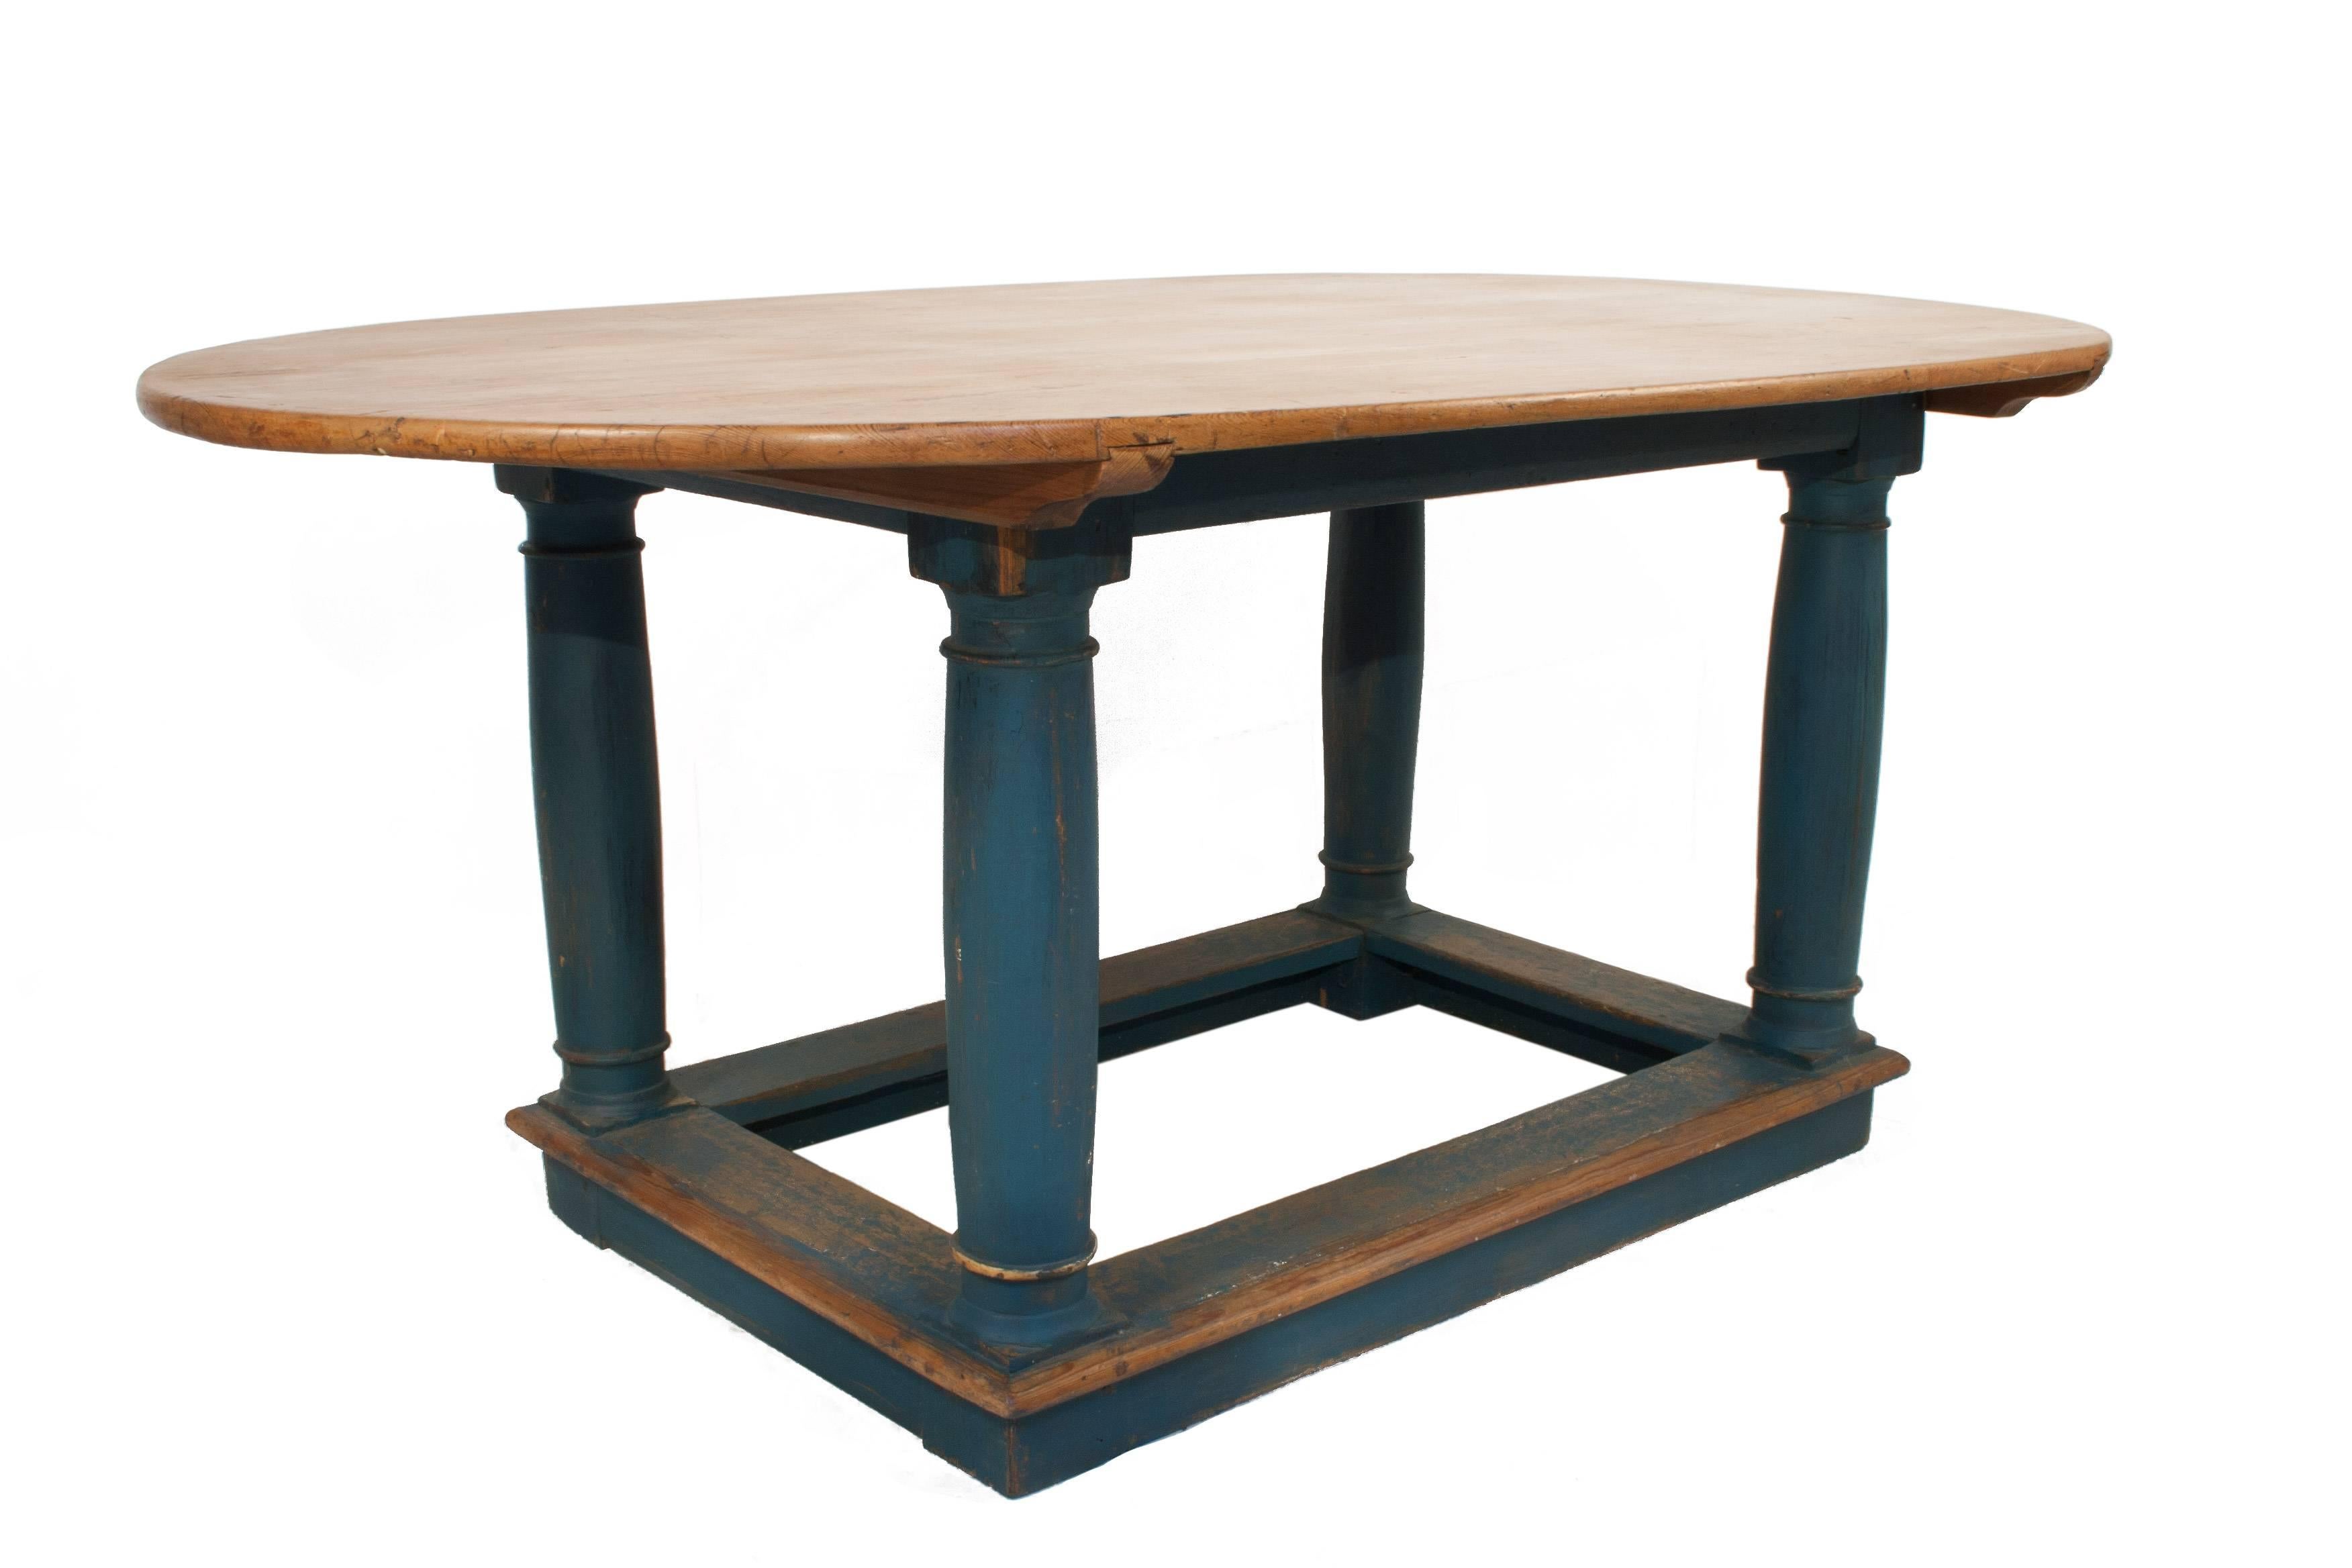 Baroque oval table with a worn blue patina on the base.